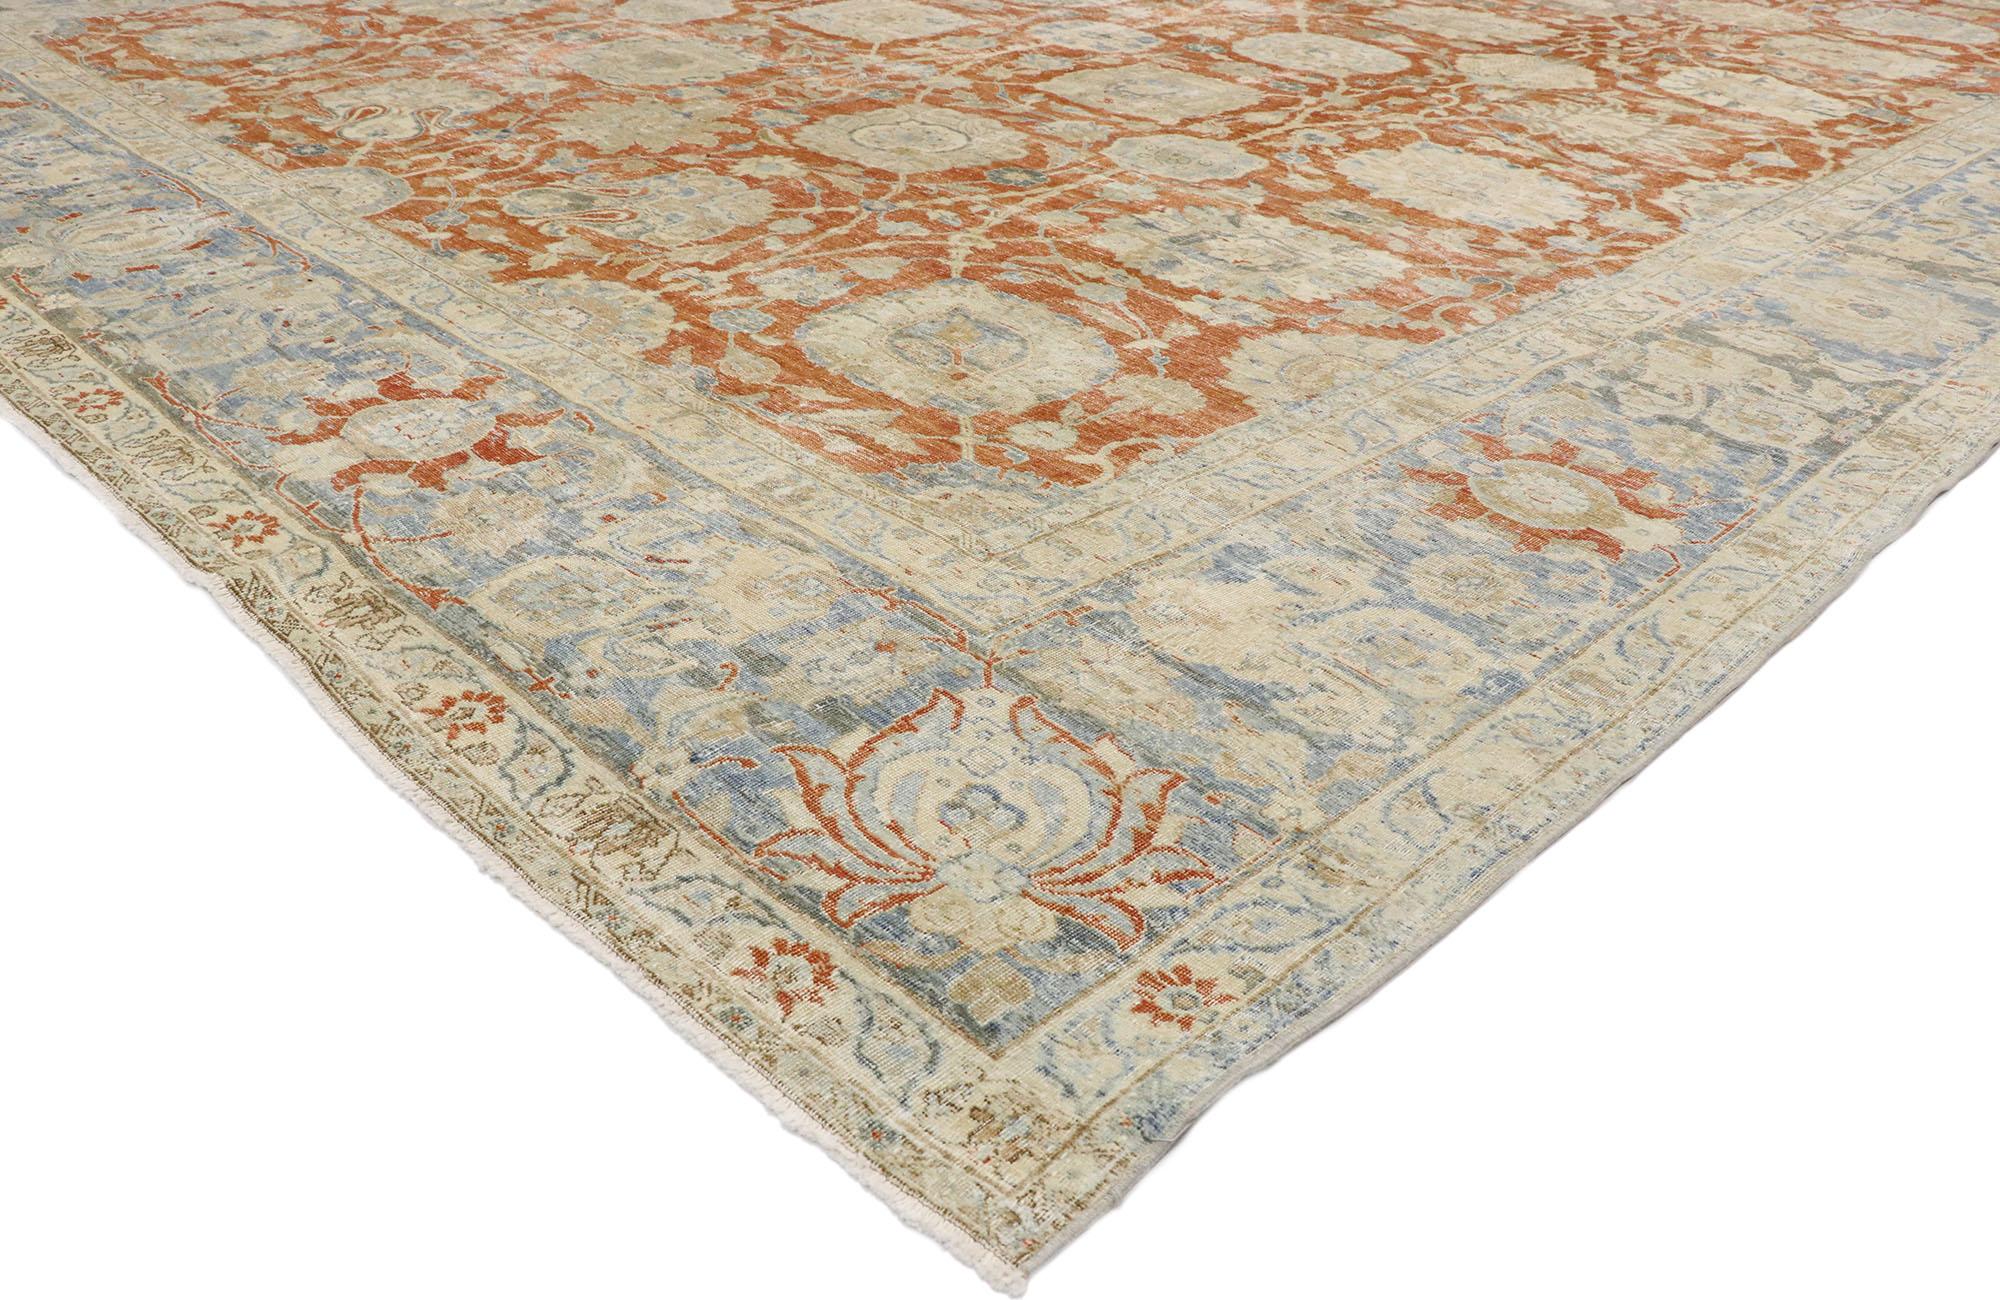 Hand-Knotted Distressed Antique Persian Tabriz Rug with Rustic Colonial Style